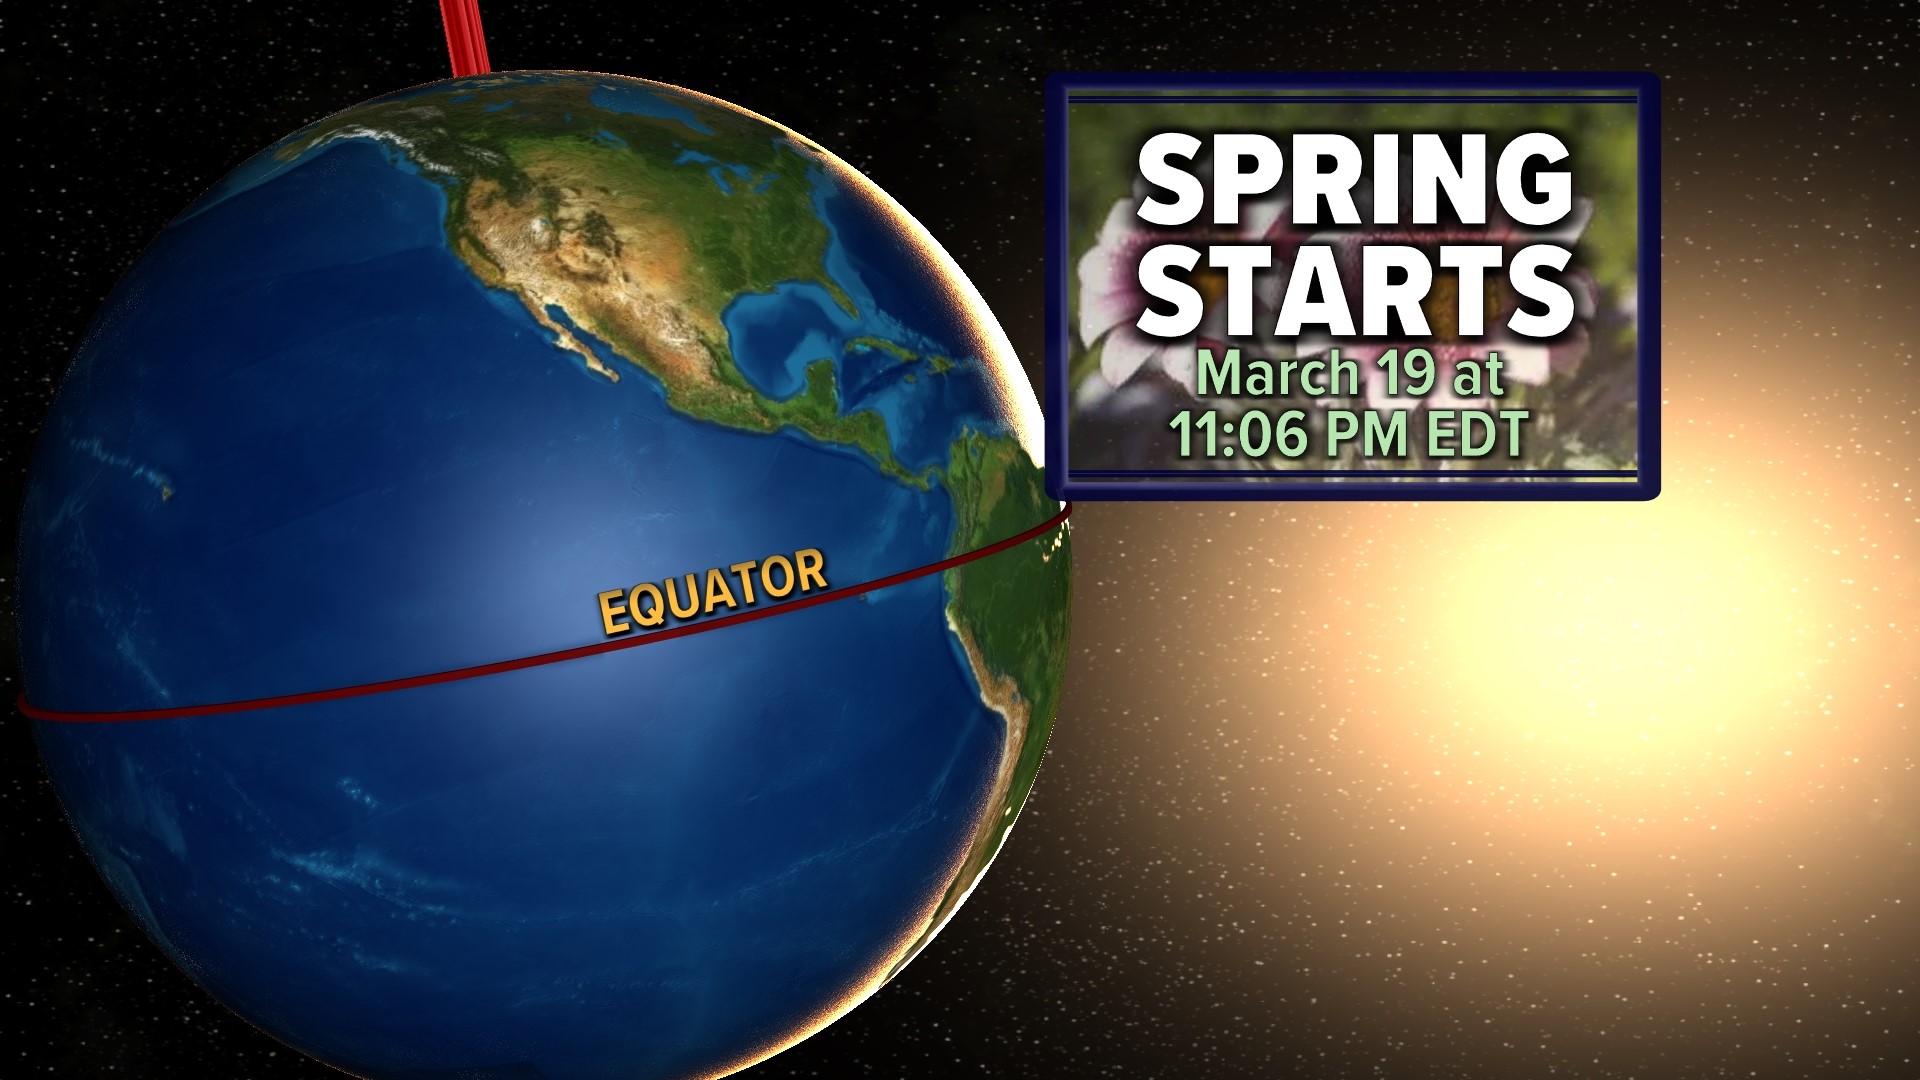 The Spring Equinox marks the astronomical start of spring in the Northern Hemisphere.